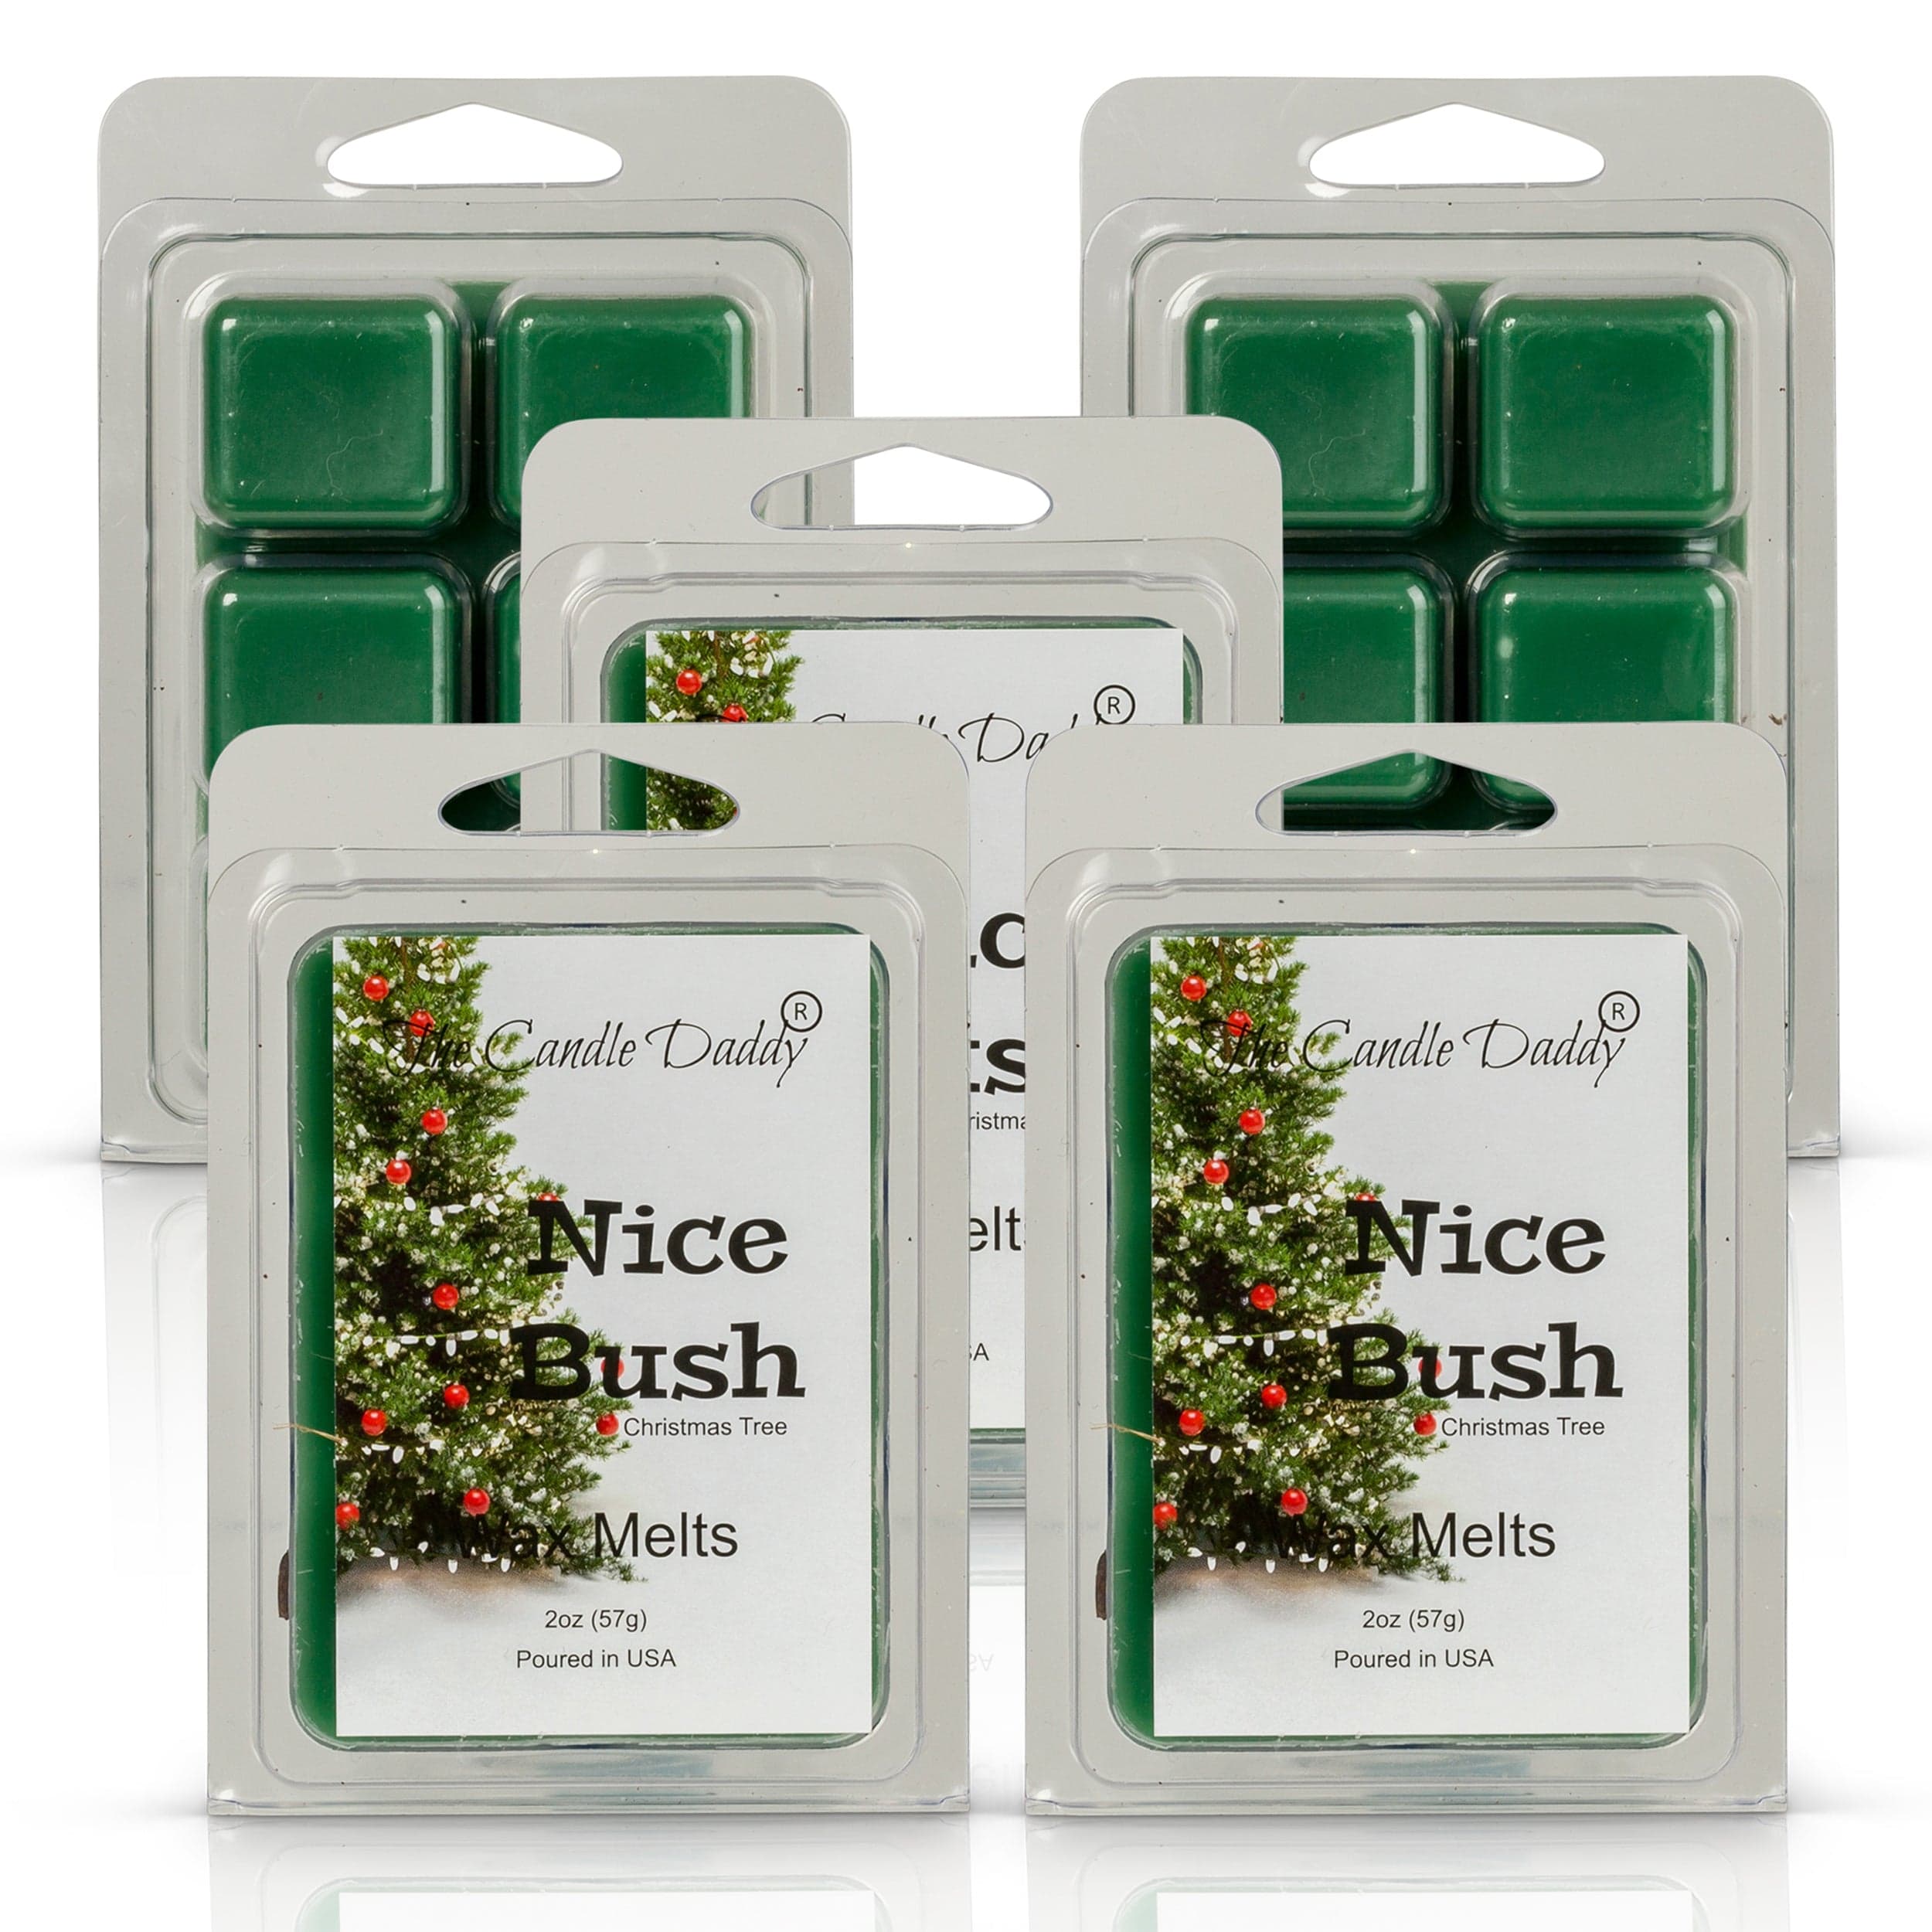 Christmas Cabin Scented Wax Cubes  Small Batch. Hand Poured. – Sugar Belle  Candles